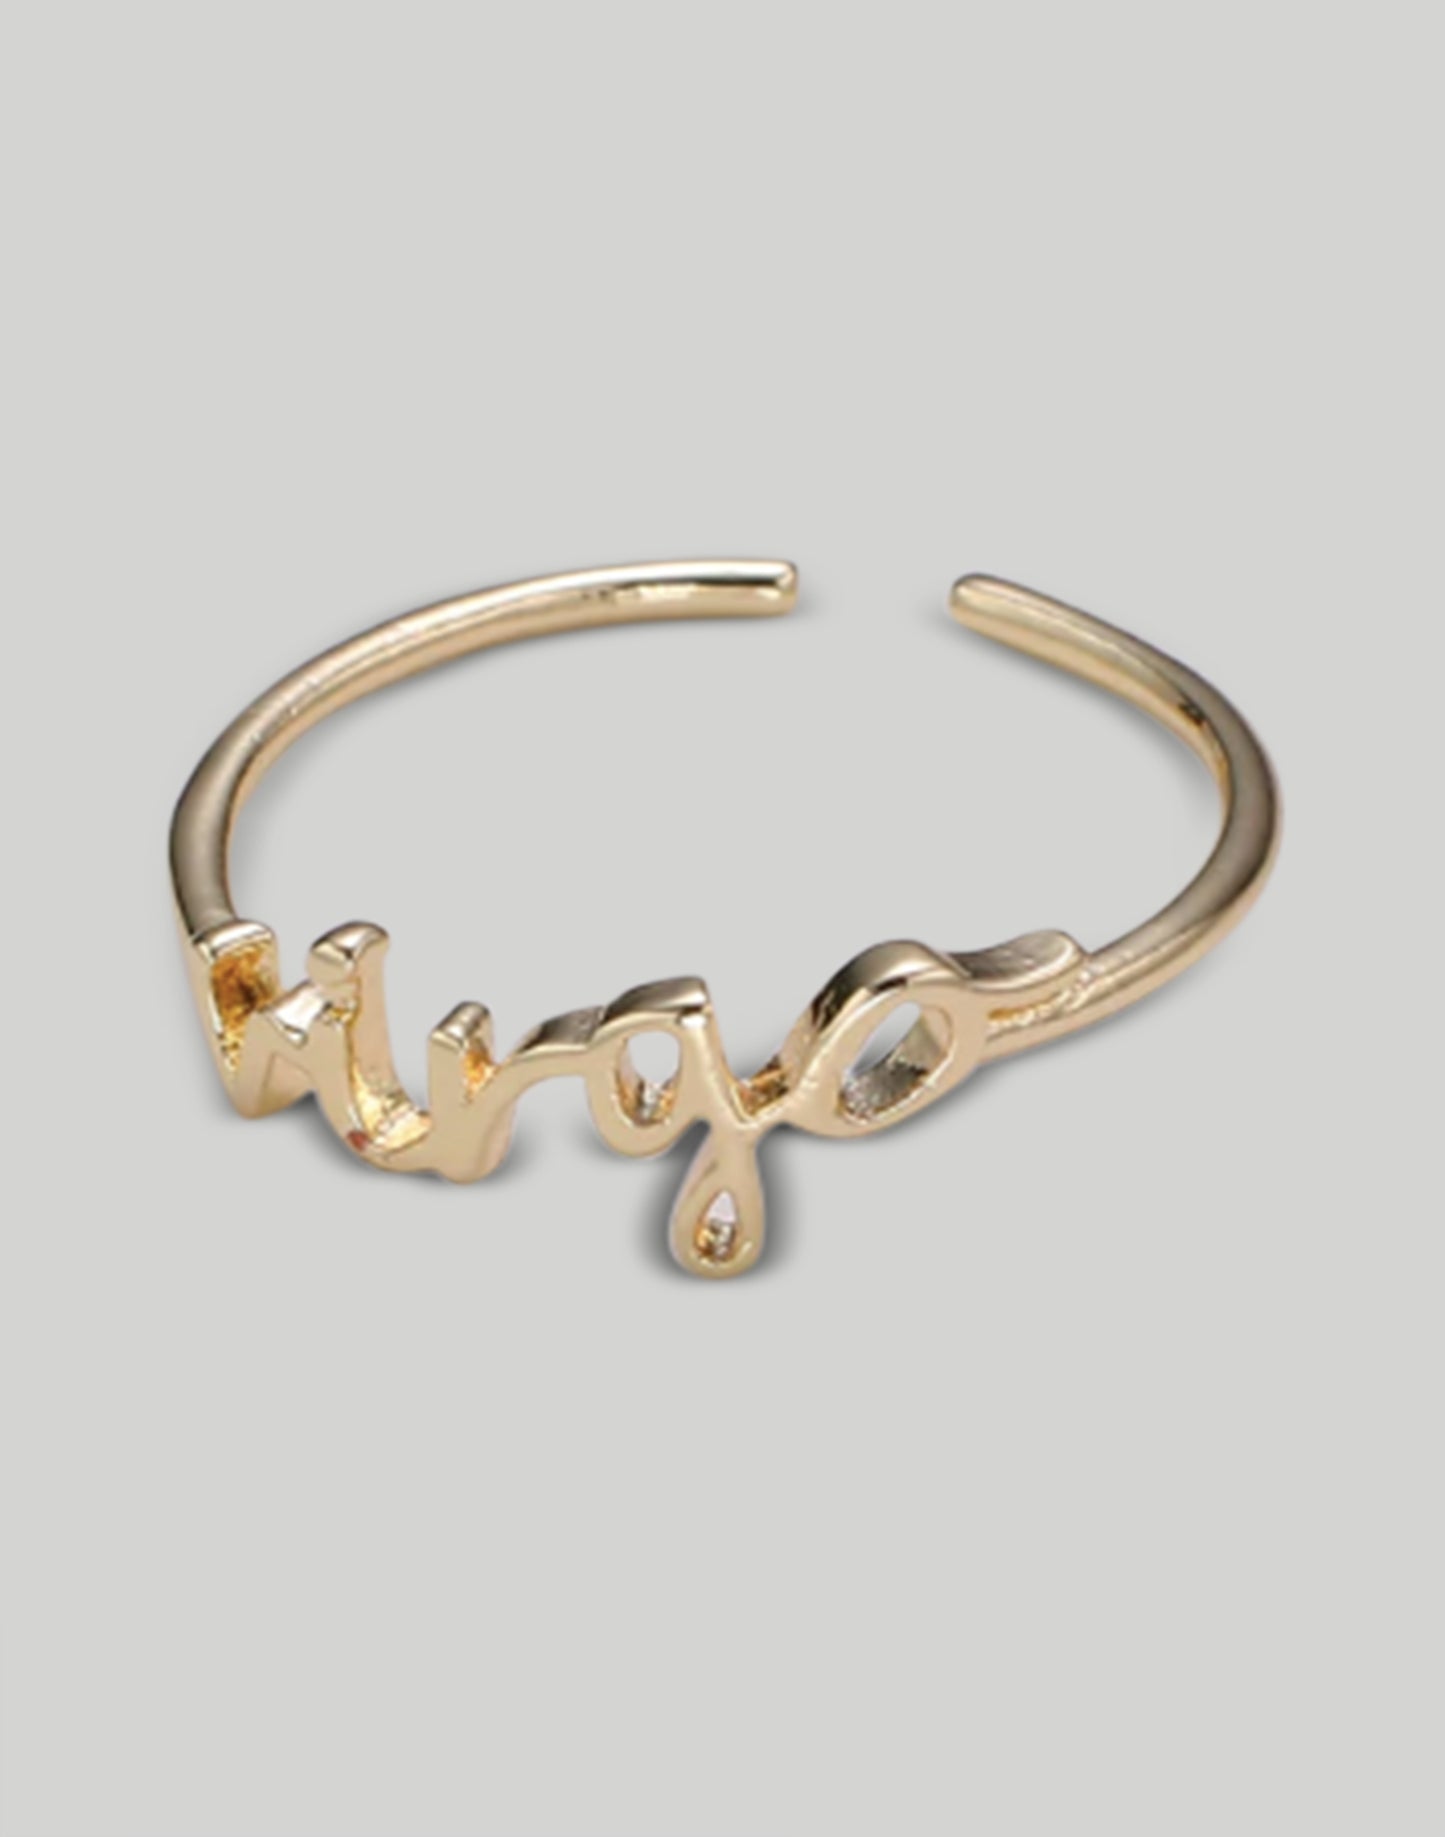 The Adjustable Zodiac Ring